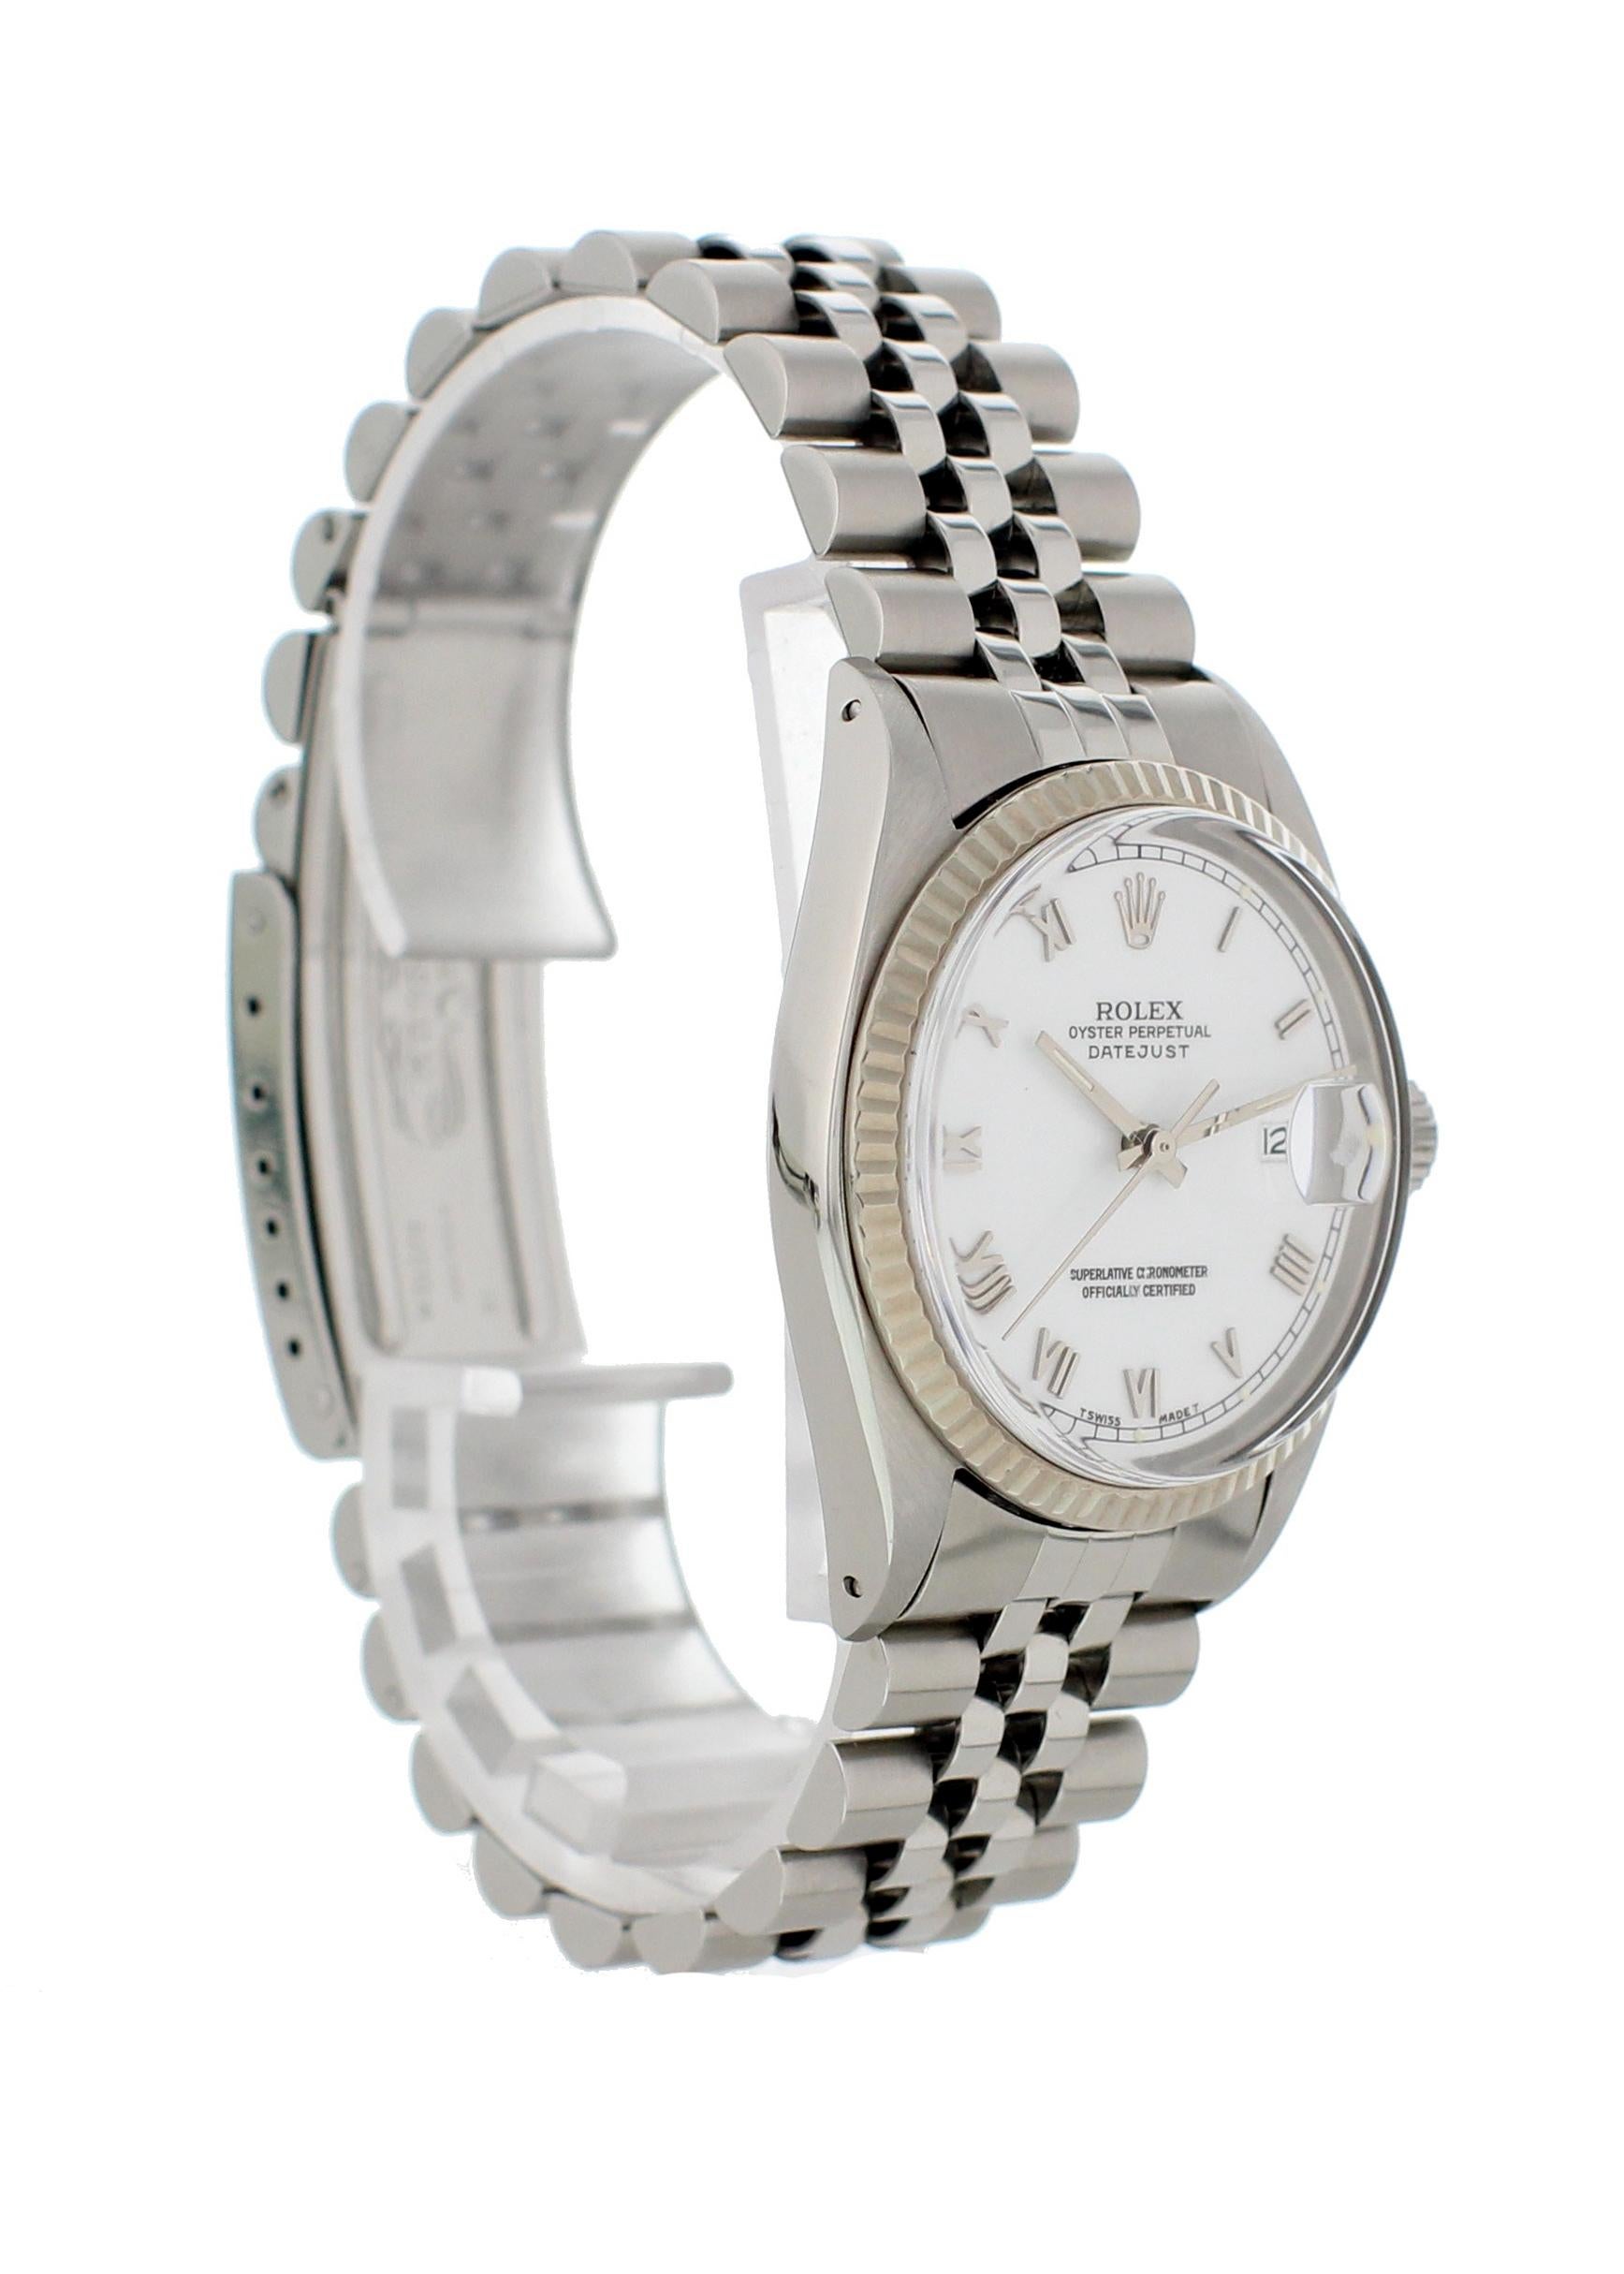 Rolex Oyster Perpetual Datejust 16014 Men's Watch with Papers In Excellent Condition For Sale In New York, NY